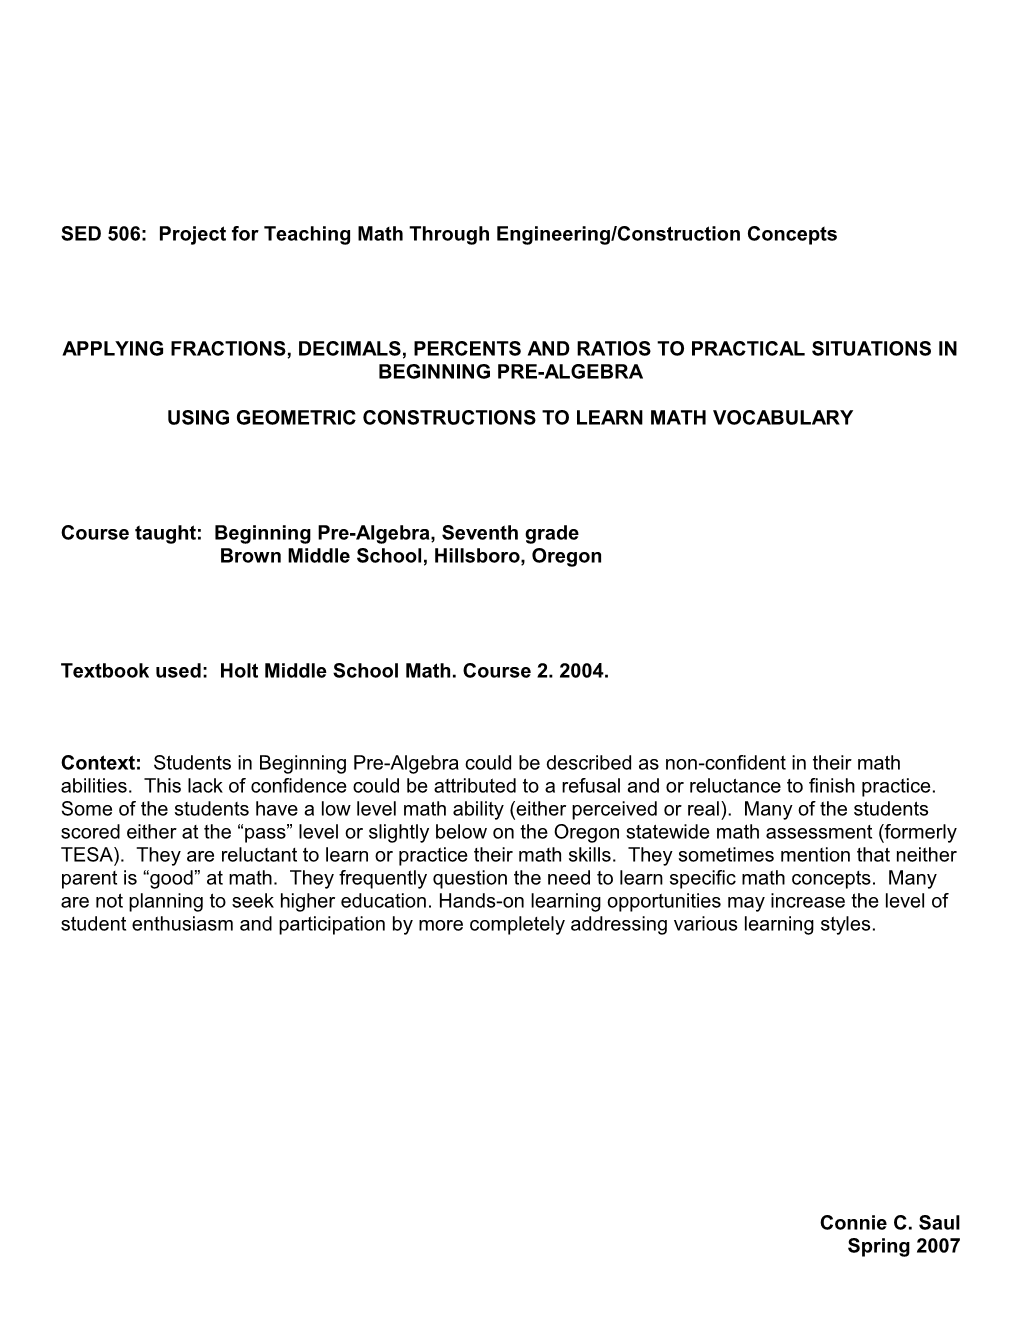 SED 506: Project for Teaching Science Through Engineering